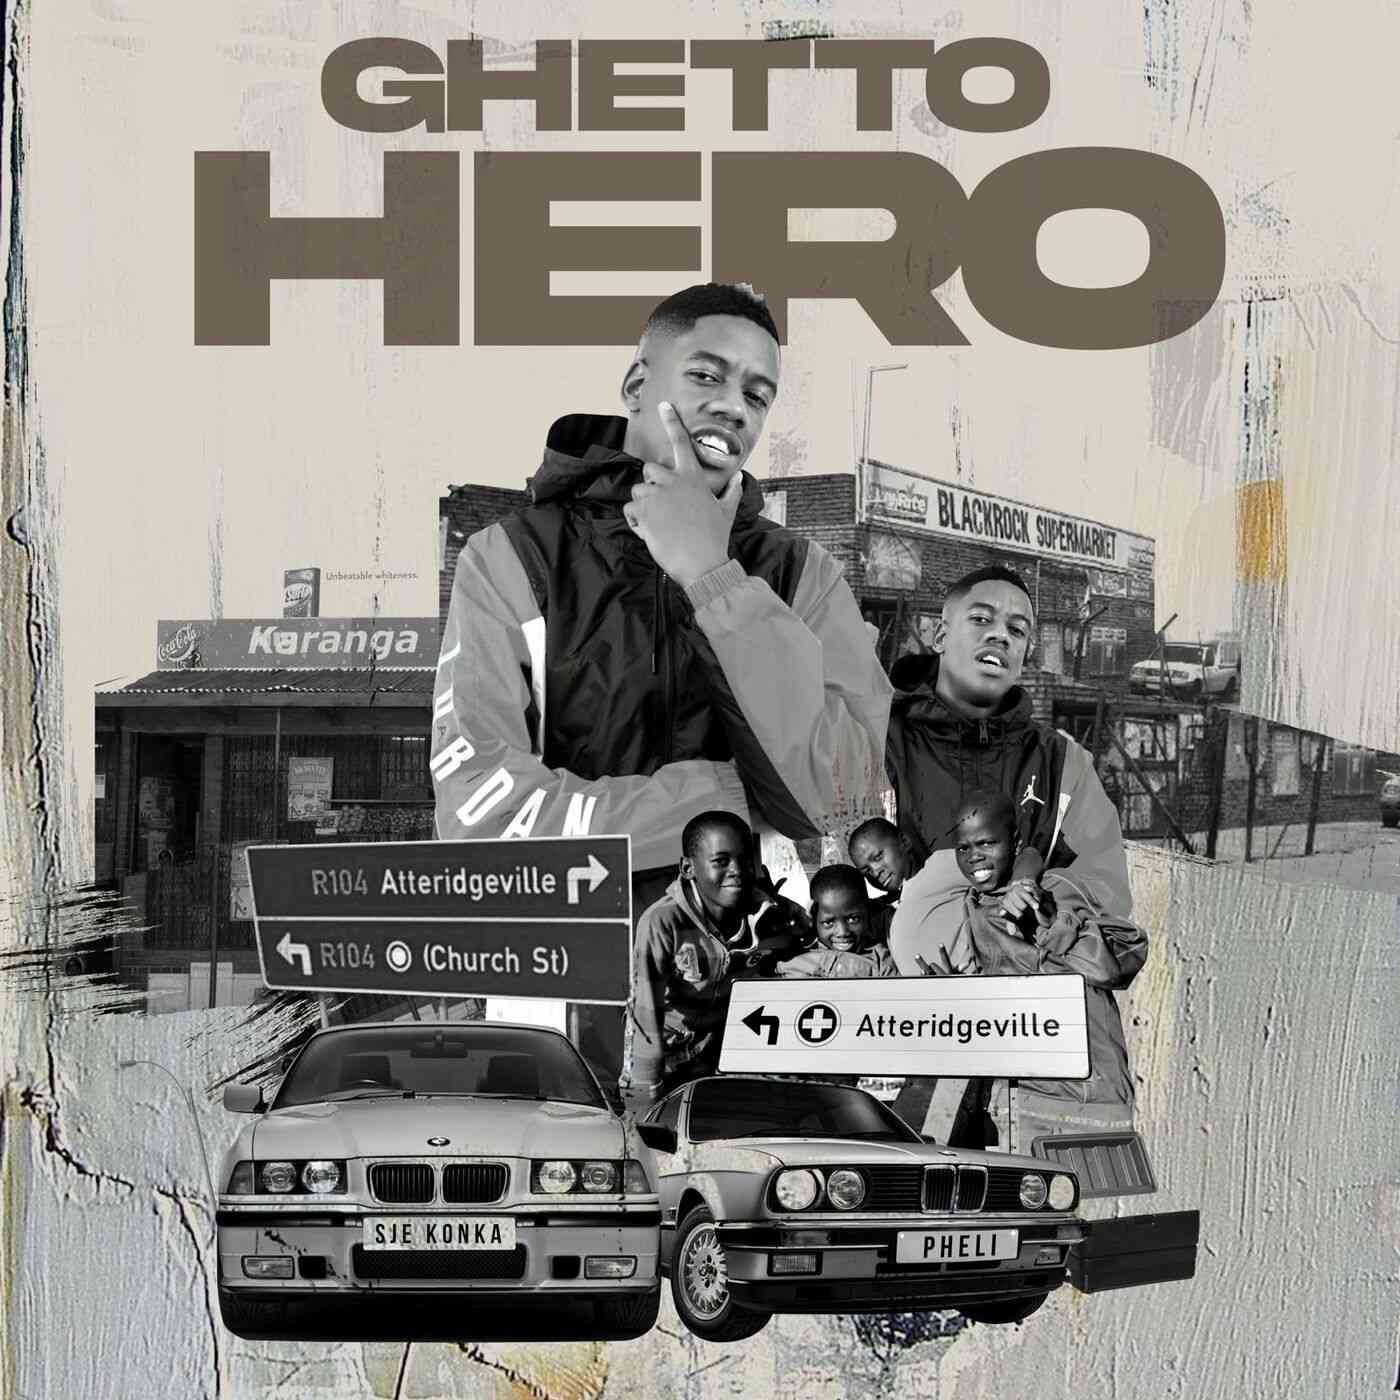 Ghetto Hero: Sje Konka Aims For The Throne With Forthcoming Album